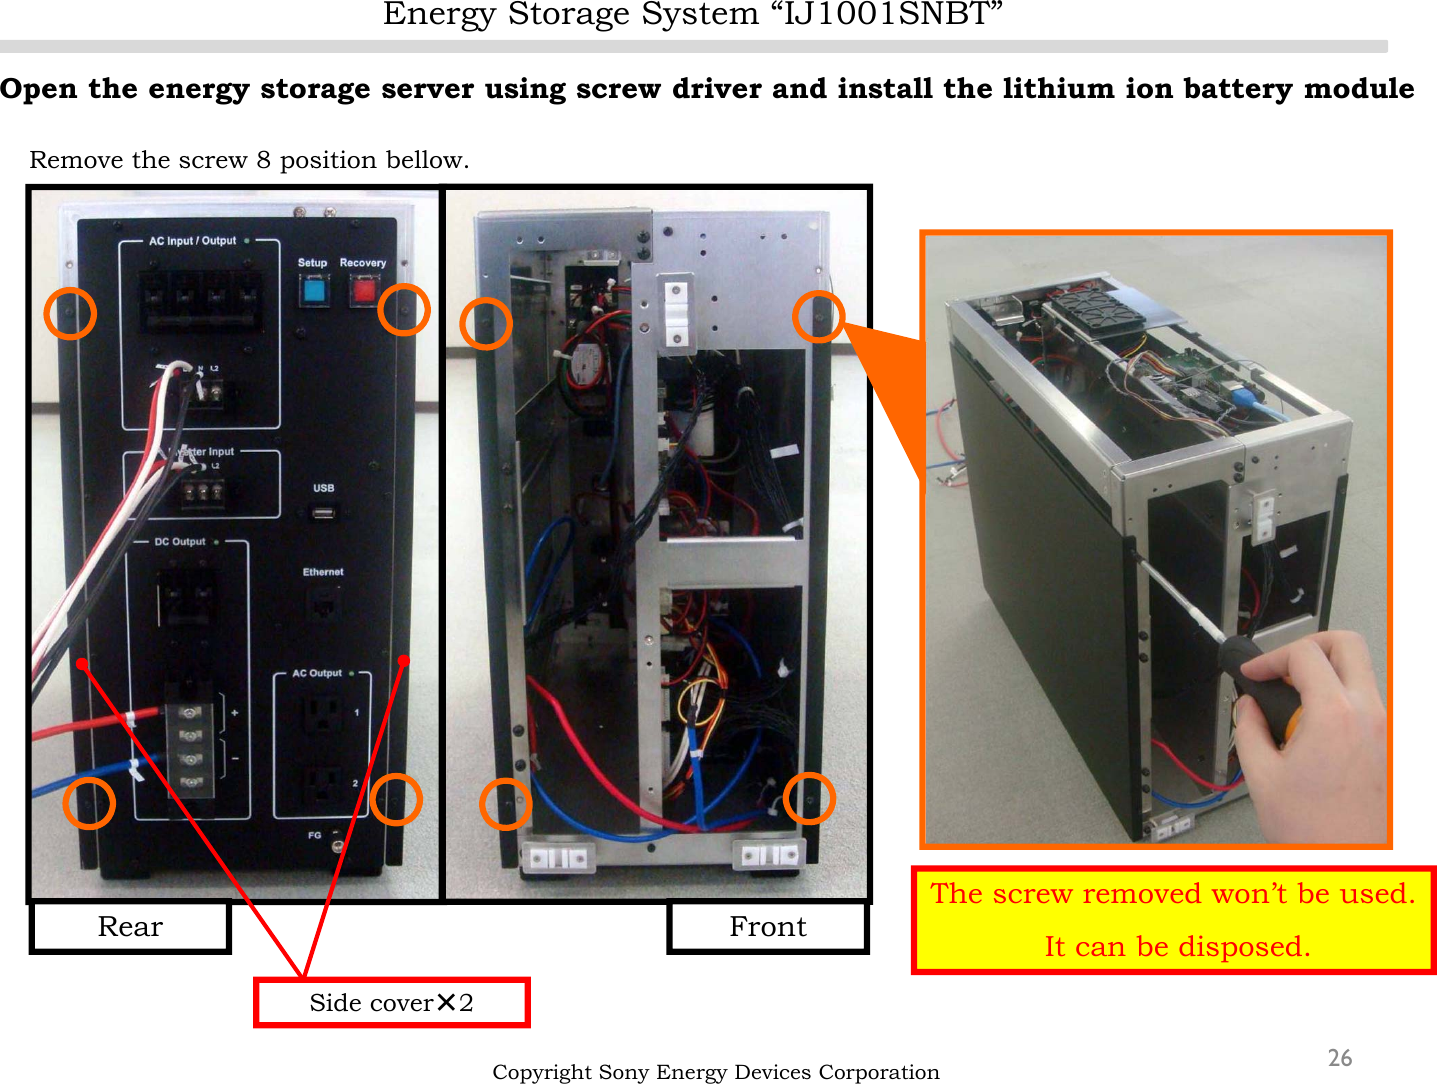 Energy Storage System “IJ1001SNBT”26Open the energy storage server using screw driver and install the lithium ion battery moduleRemove the screw 8 position bellow.Copyright Sony Energy Devices CorporationSide cover×2FrontRearThe screw removed won’t be used.It can be disposed.